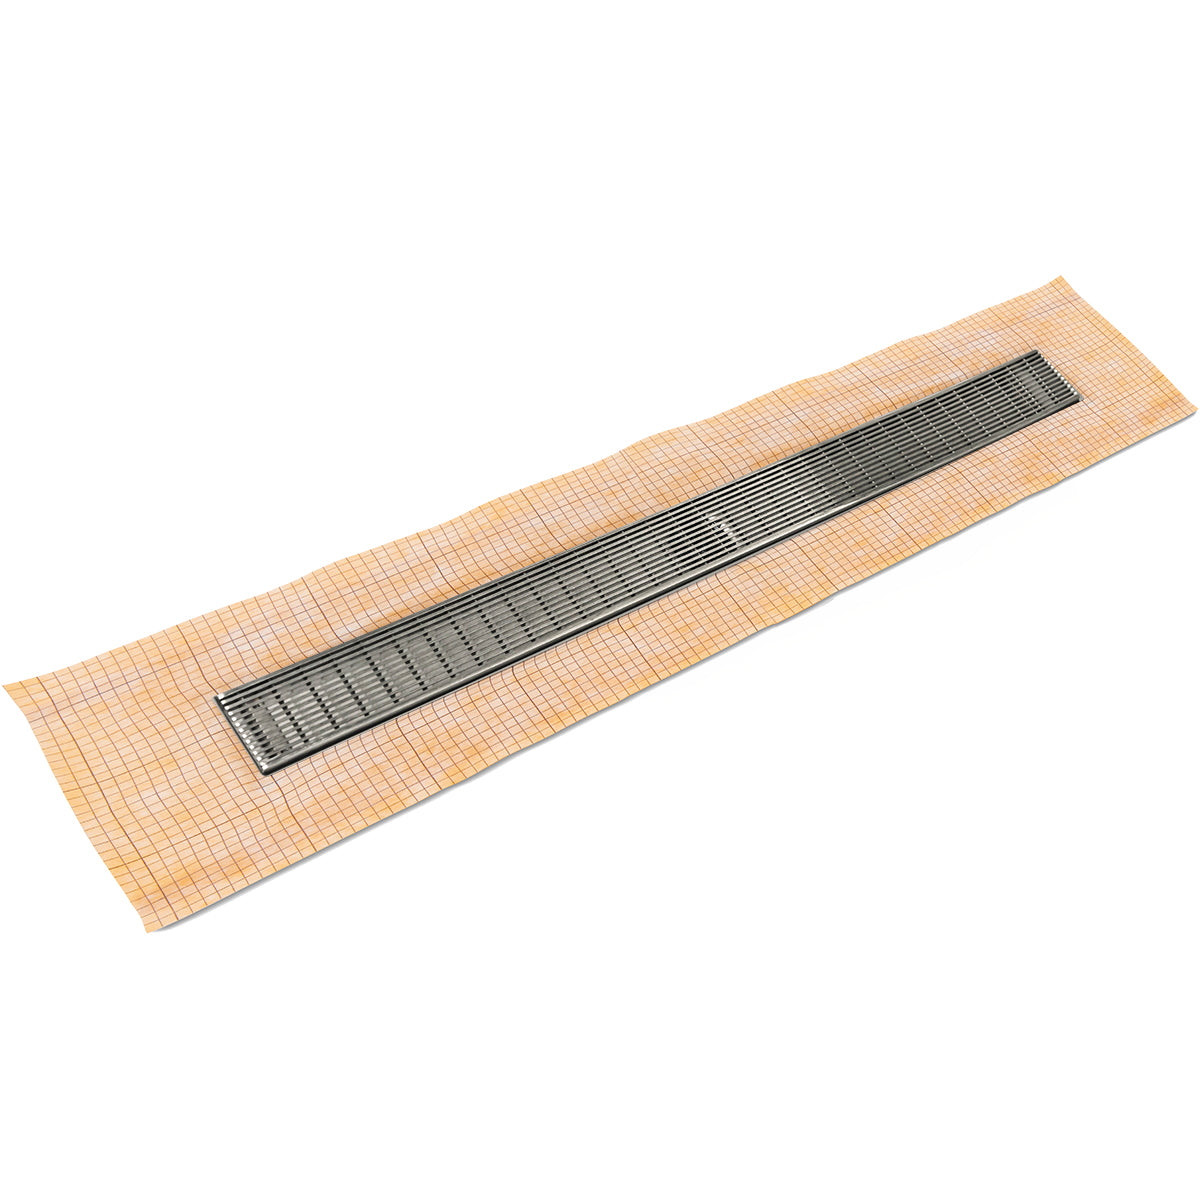 Infinity Drain 24" FCS Series Schluter-Kerdi - Fixed Flange Linear Drain Kit with 2 1/2" Wedge Wire Grate